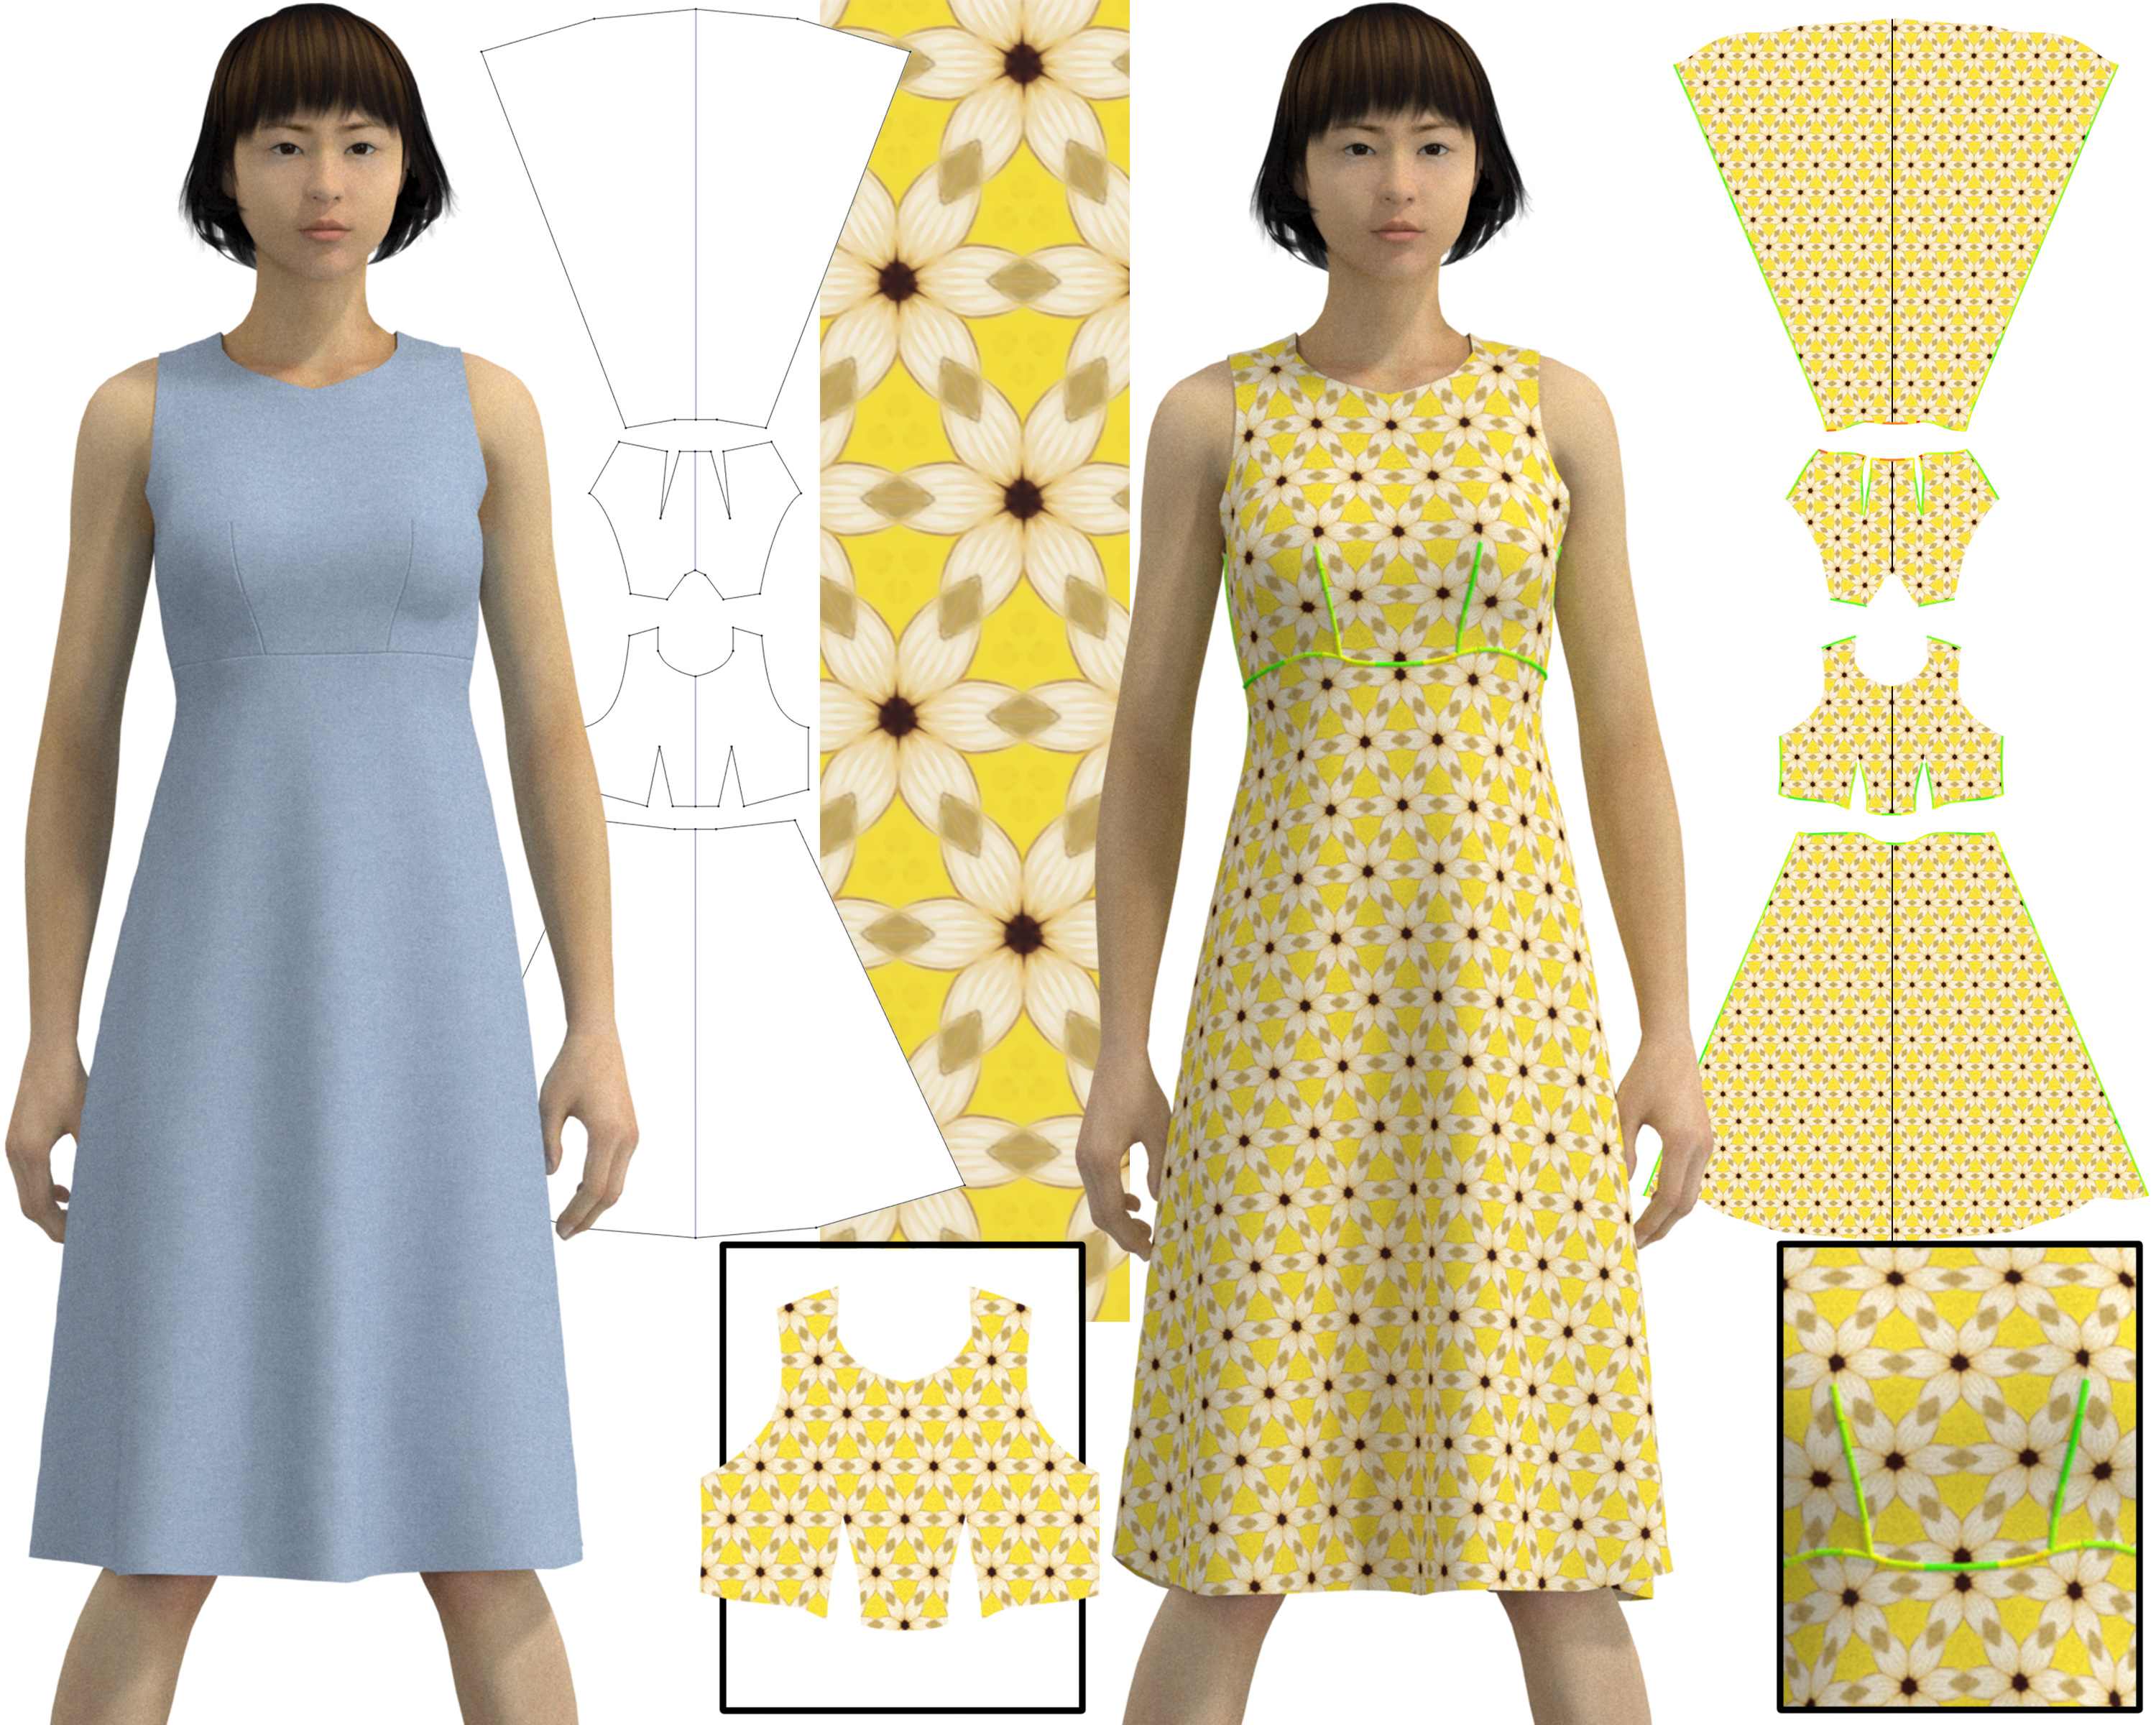 Reﬂection Symmetry in Textured Sewing Patterns